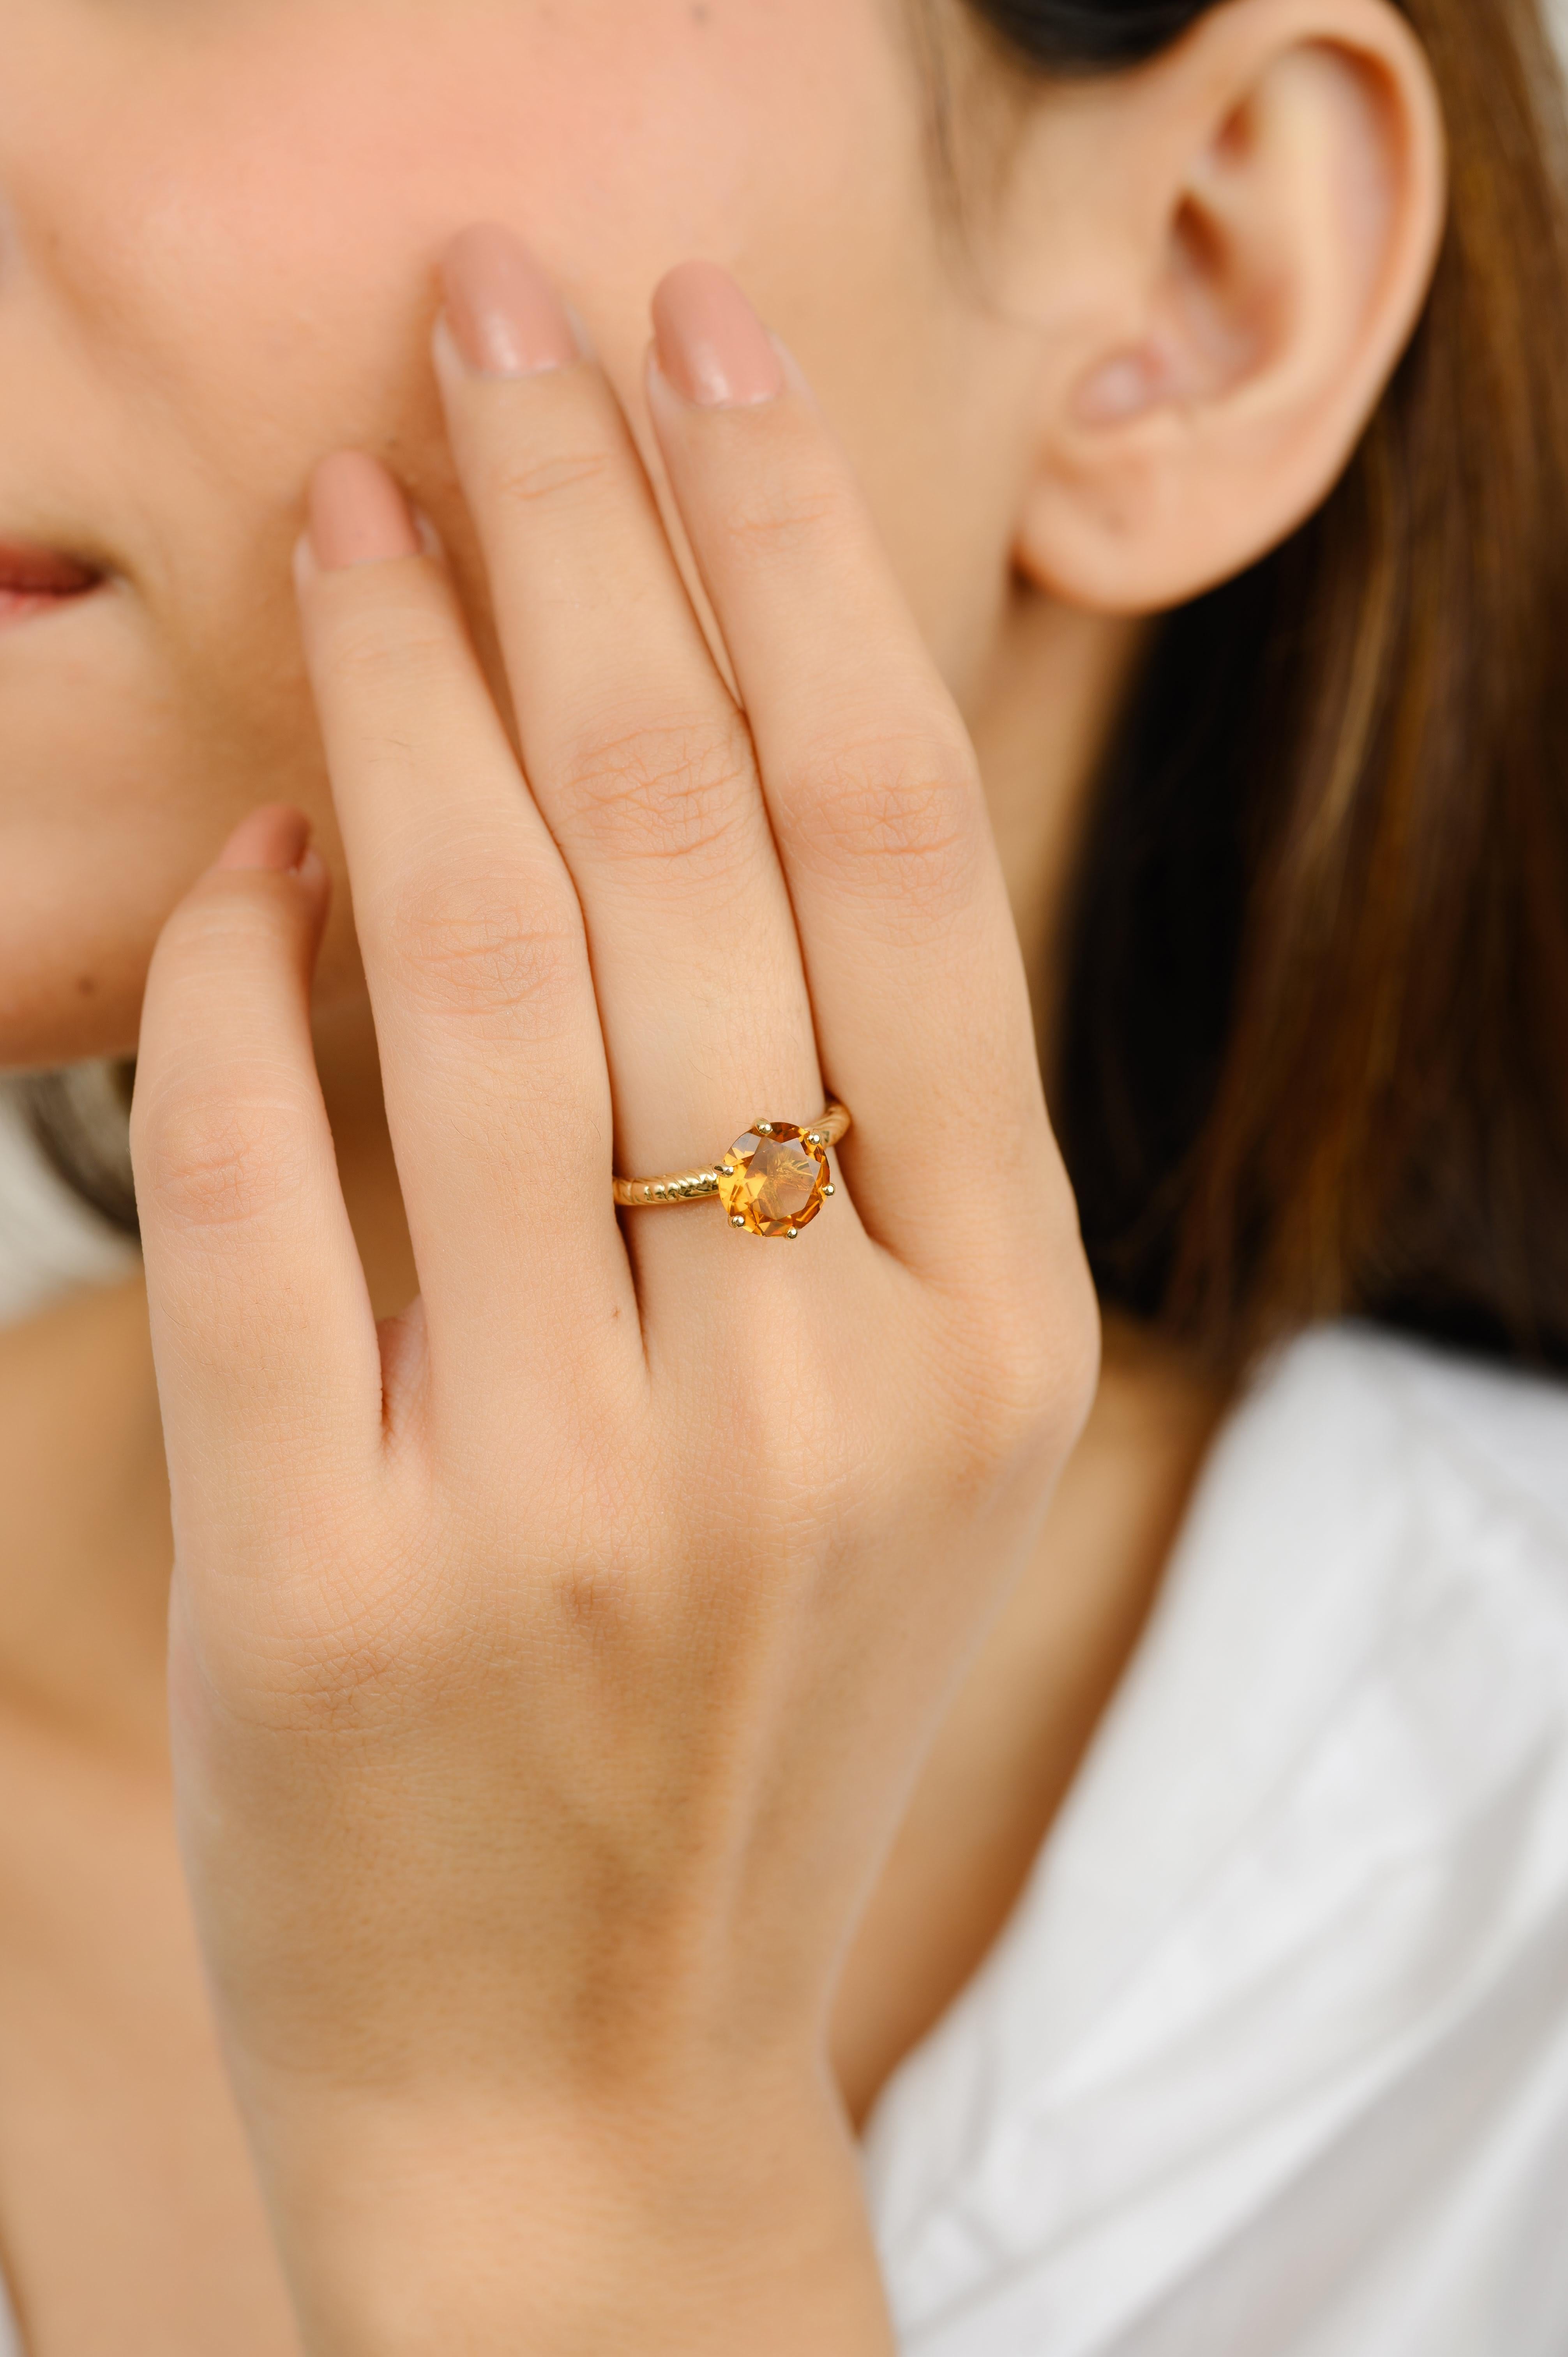 For Sale:  Round Cut Citrine Gemstone Solitaire Ring in 14k Solid Yellow Gold 6